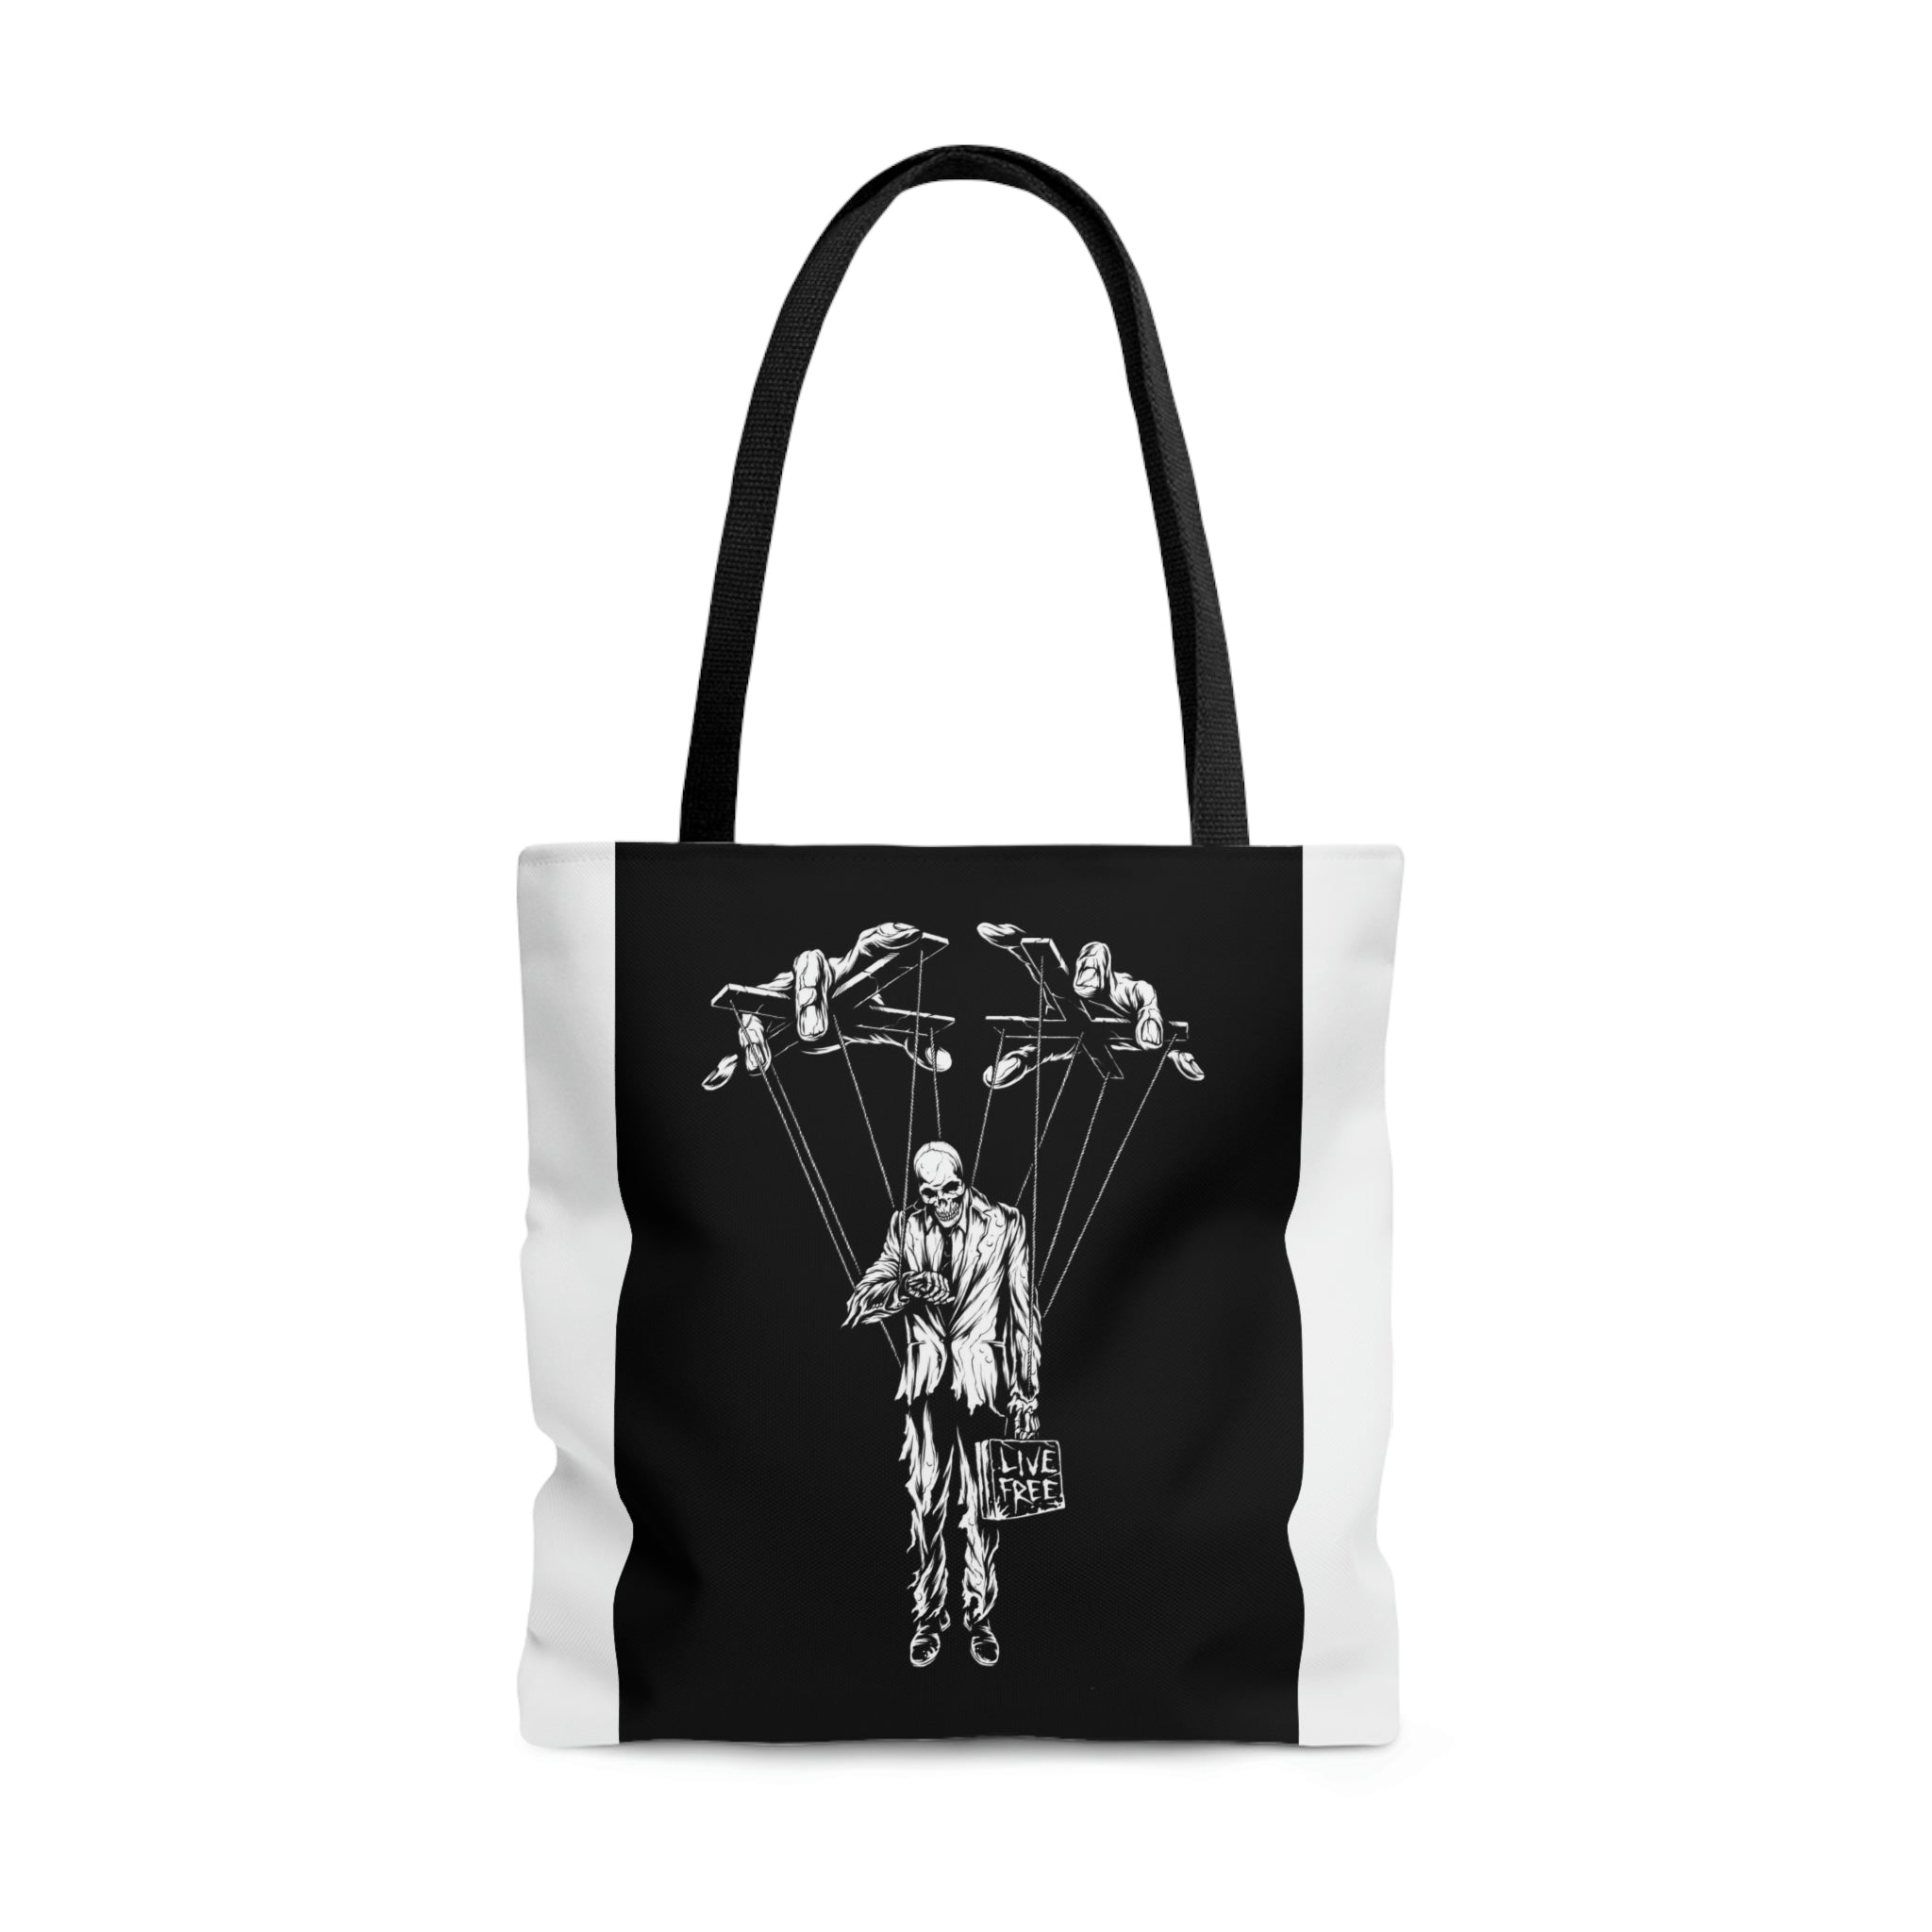 PUPPET TOTE BAG